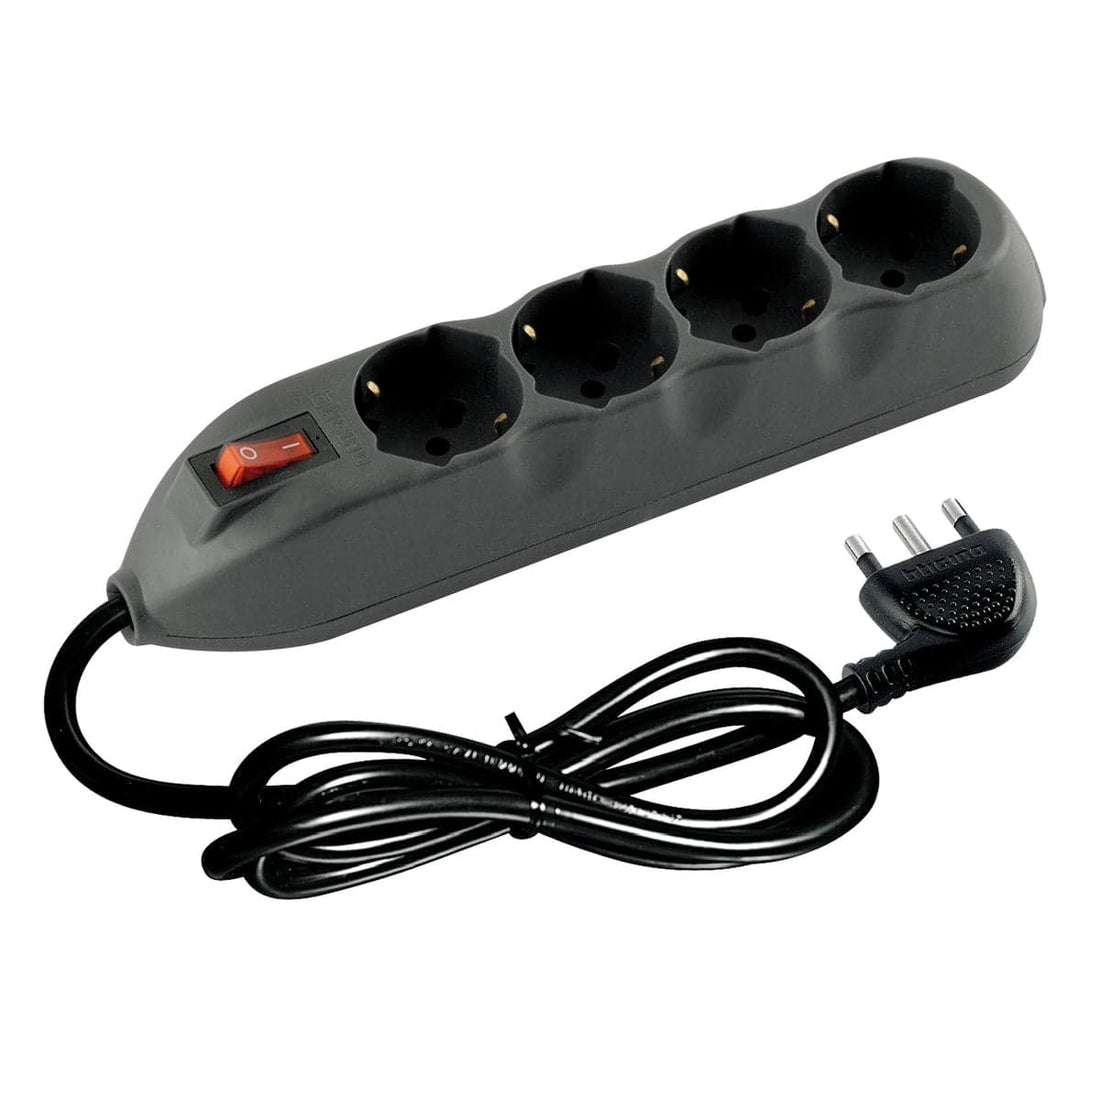 MULTIPRESA POKER 4 sockets with cable and safety switch - grey - best price from Maltashopper.com BR420110373